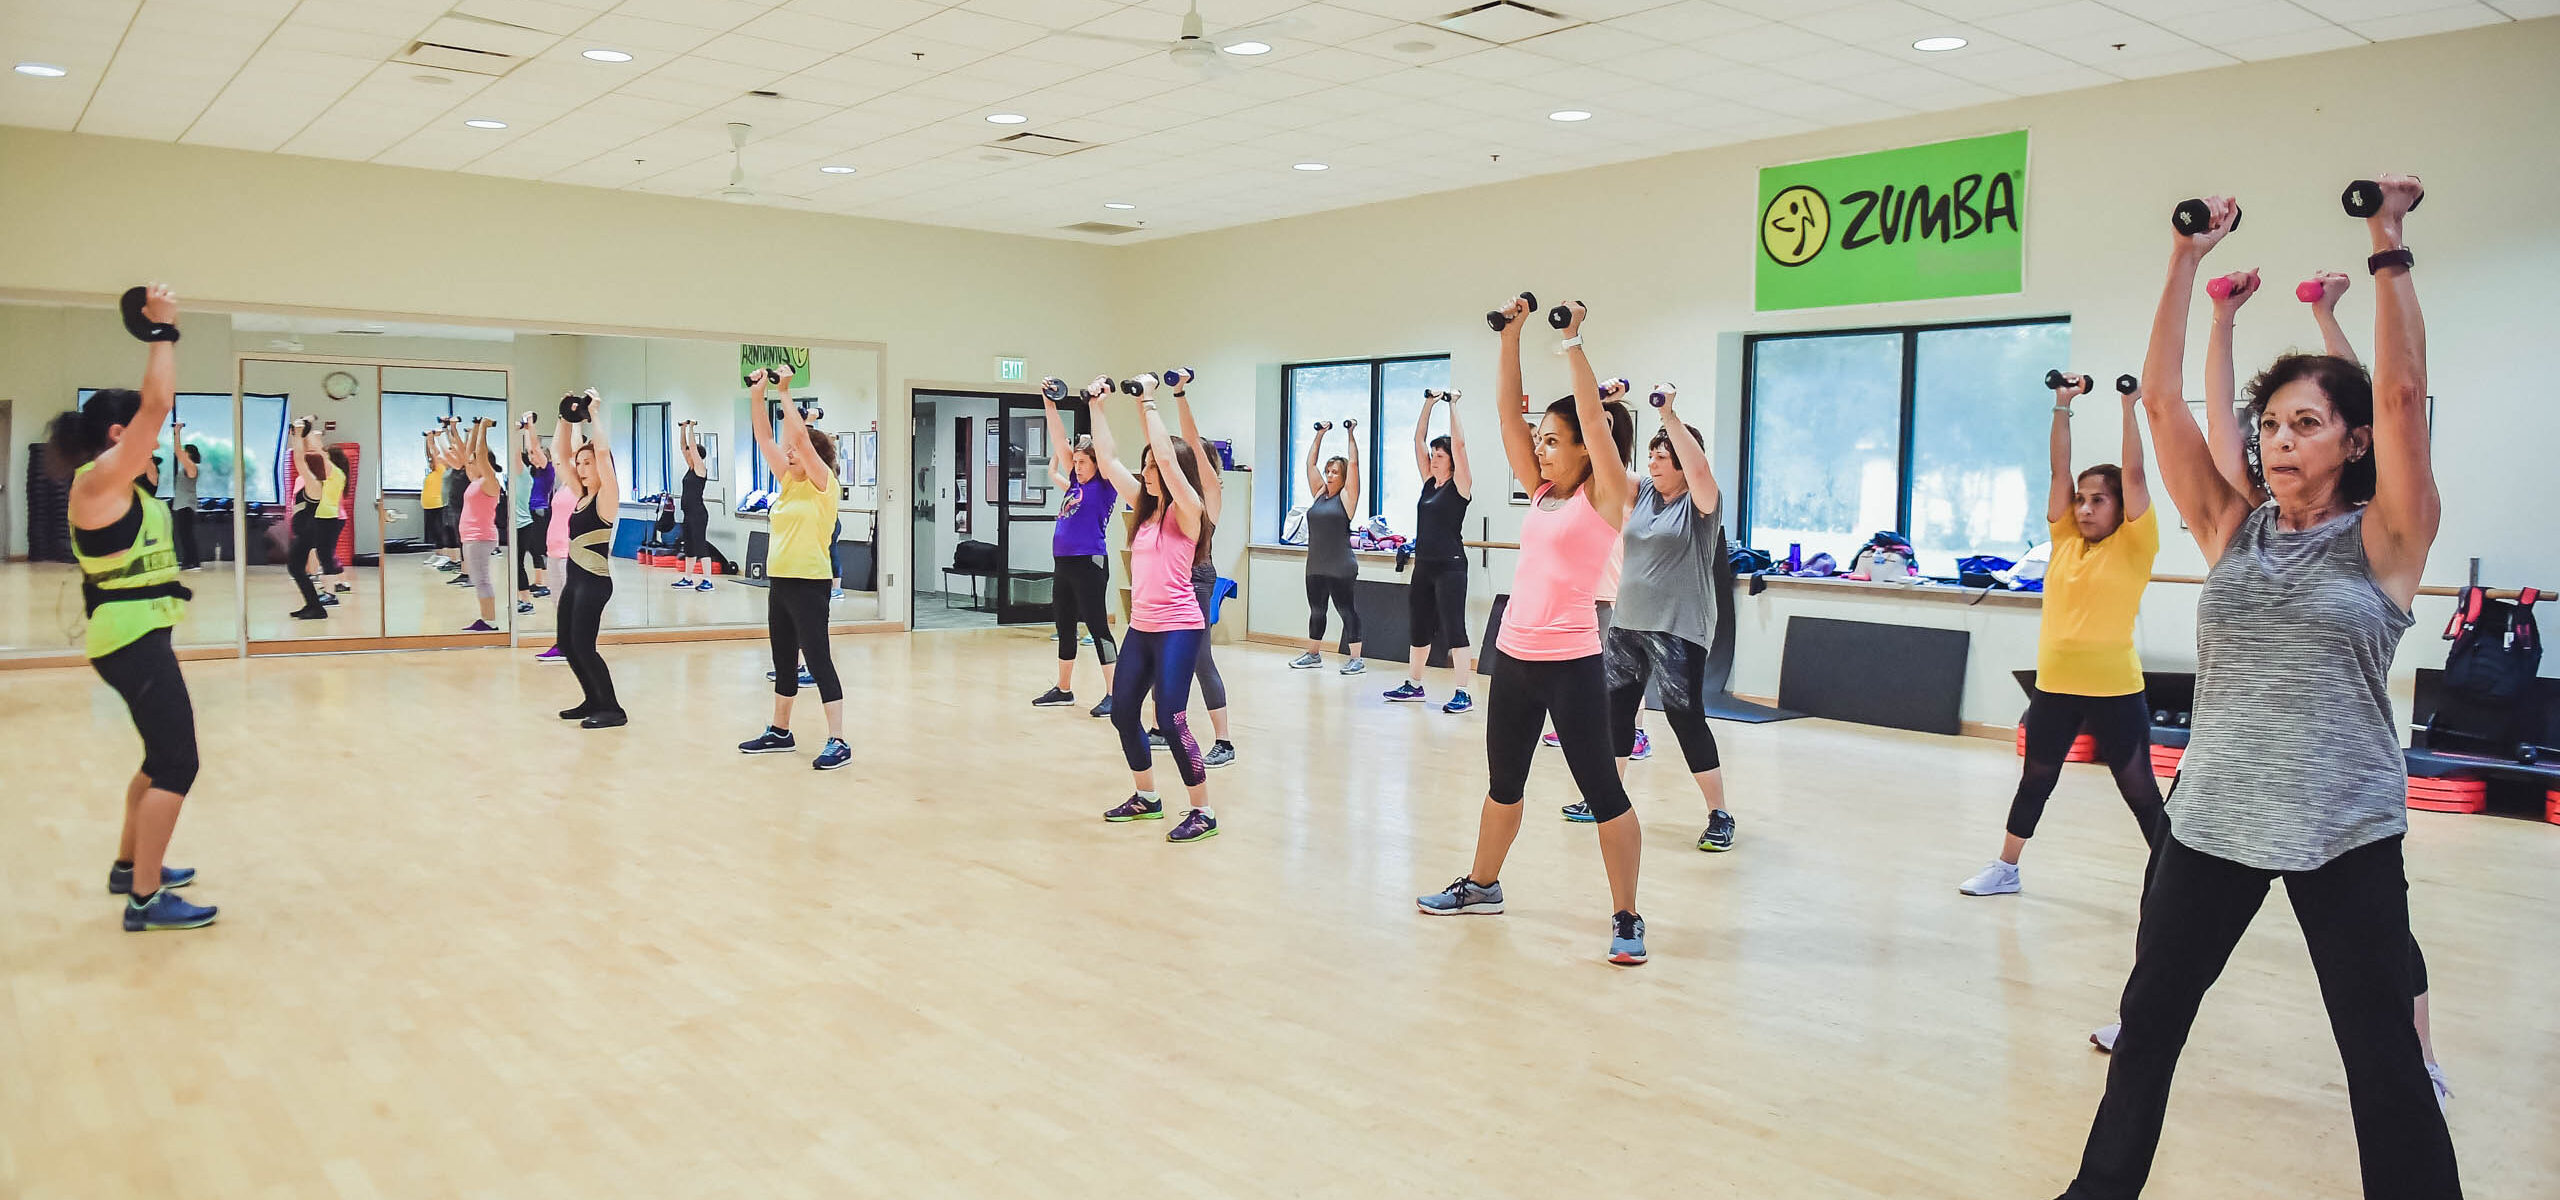 A group fitness class.